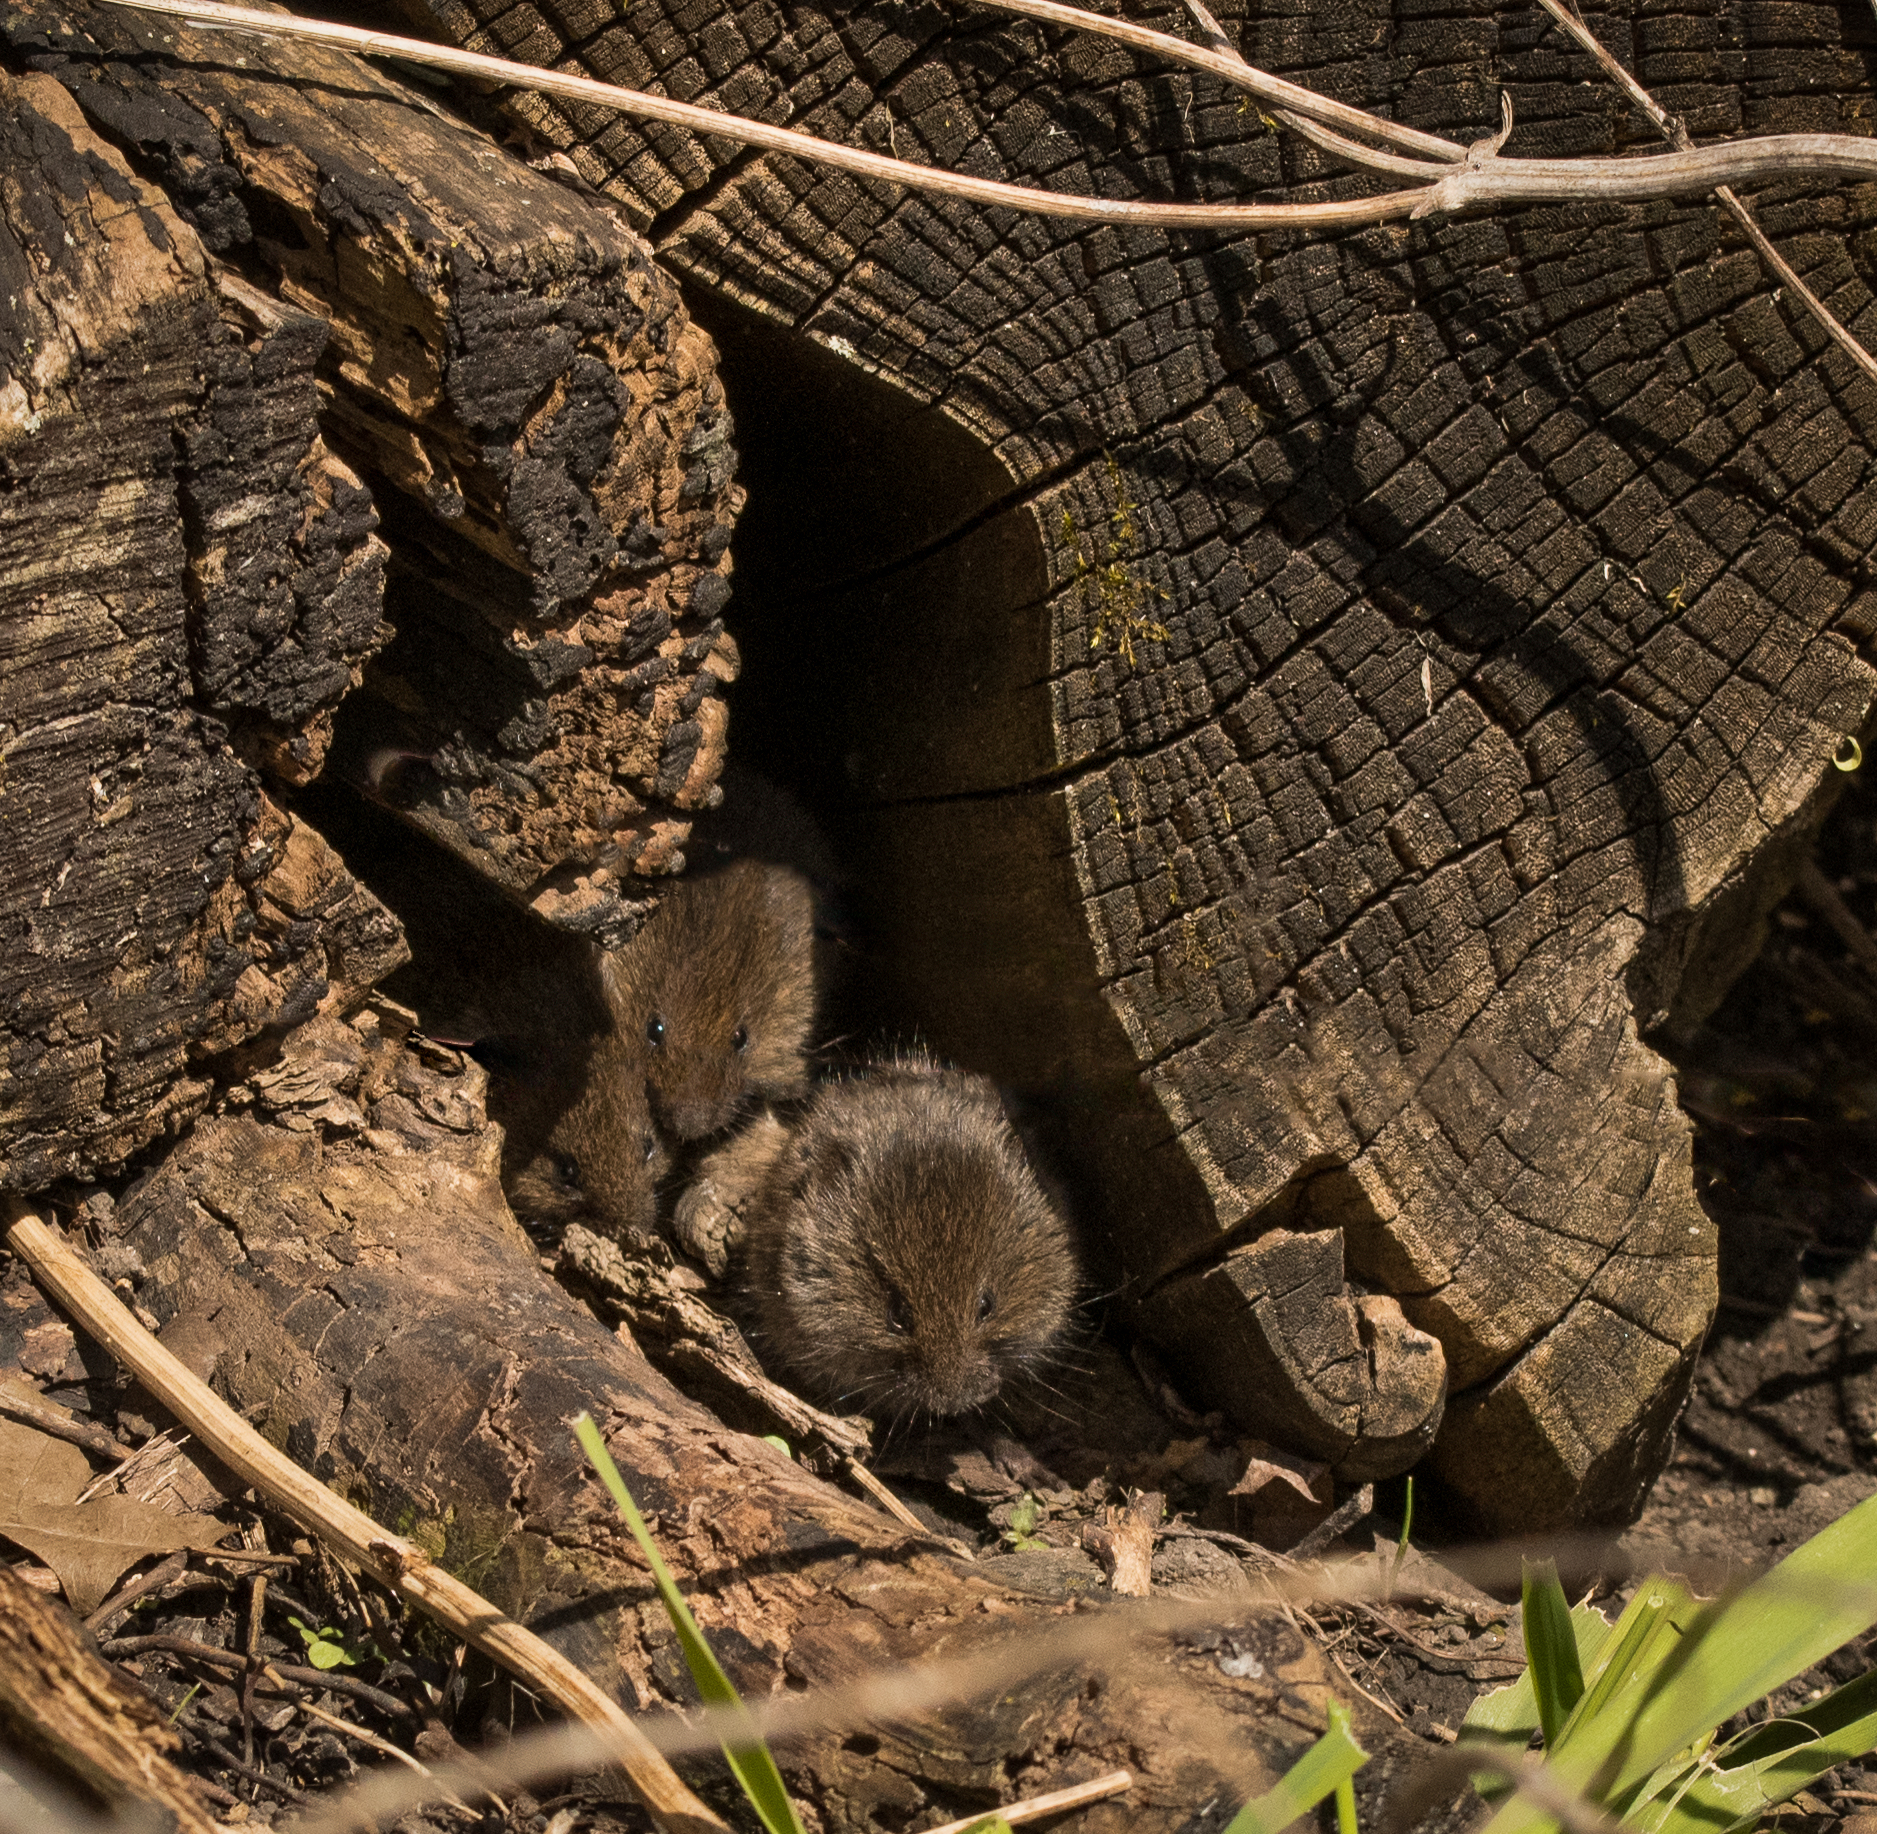 Young voles in a log.